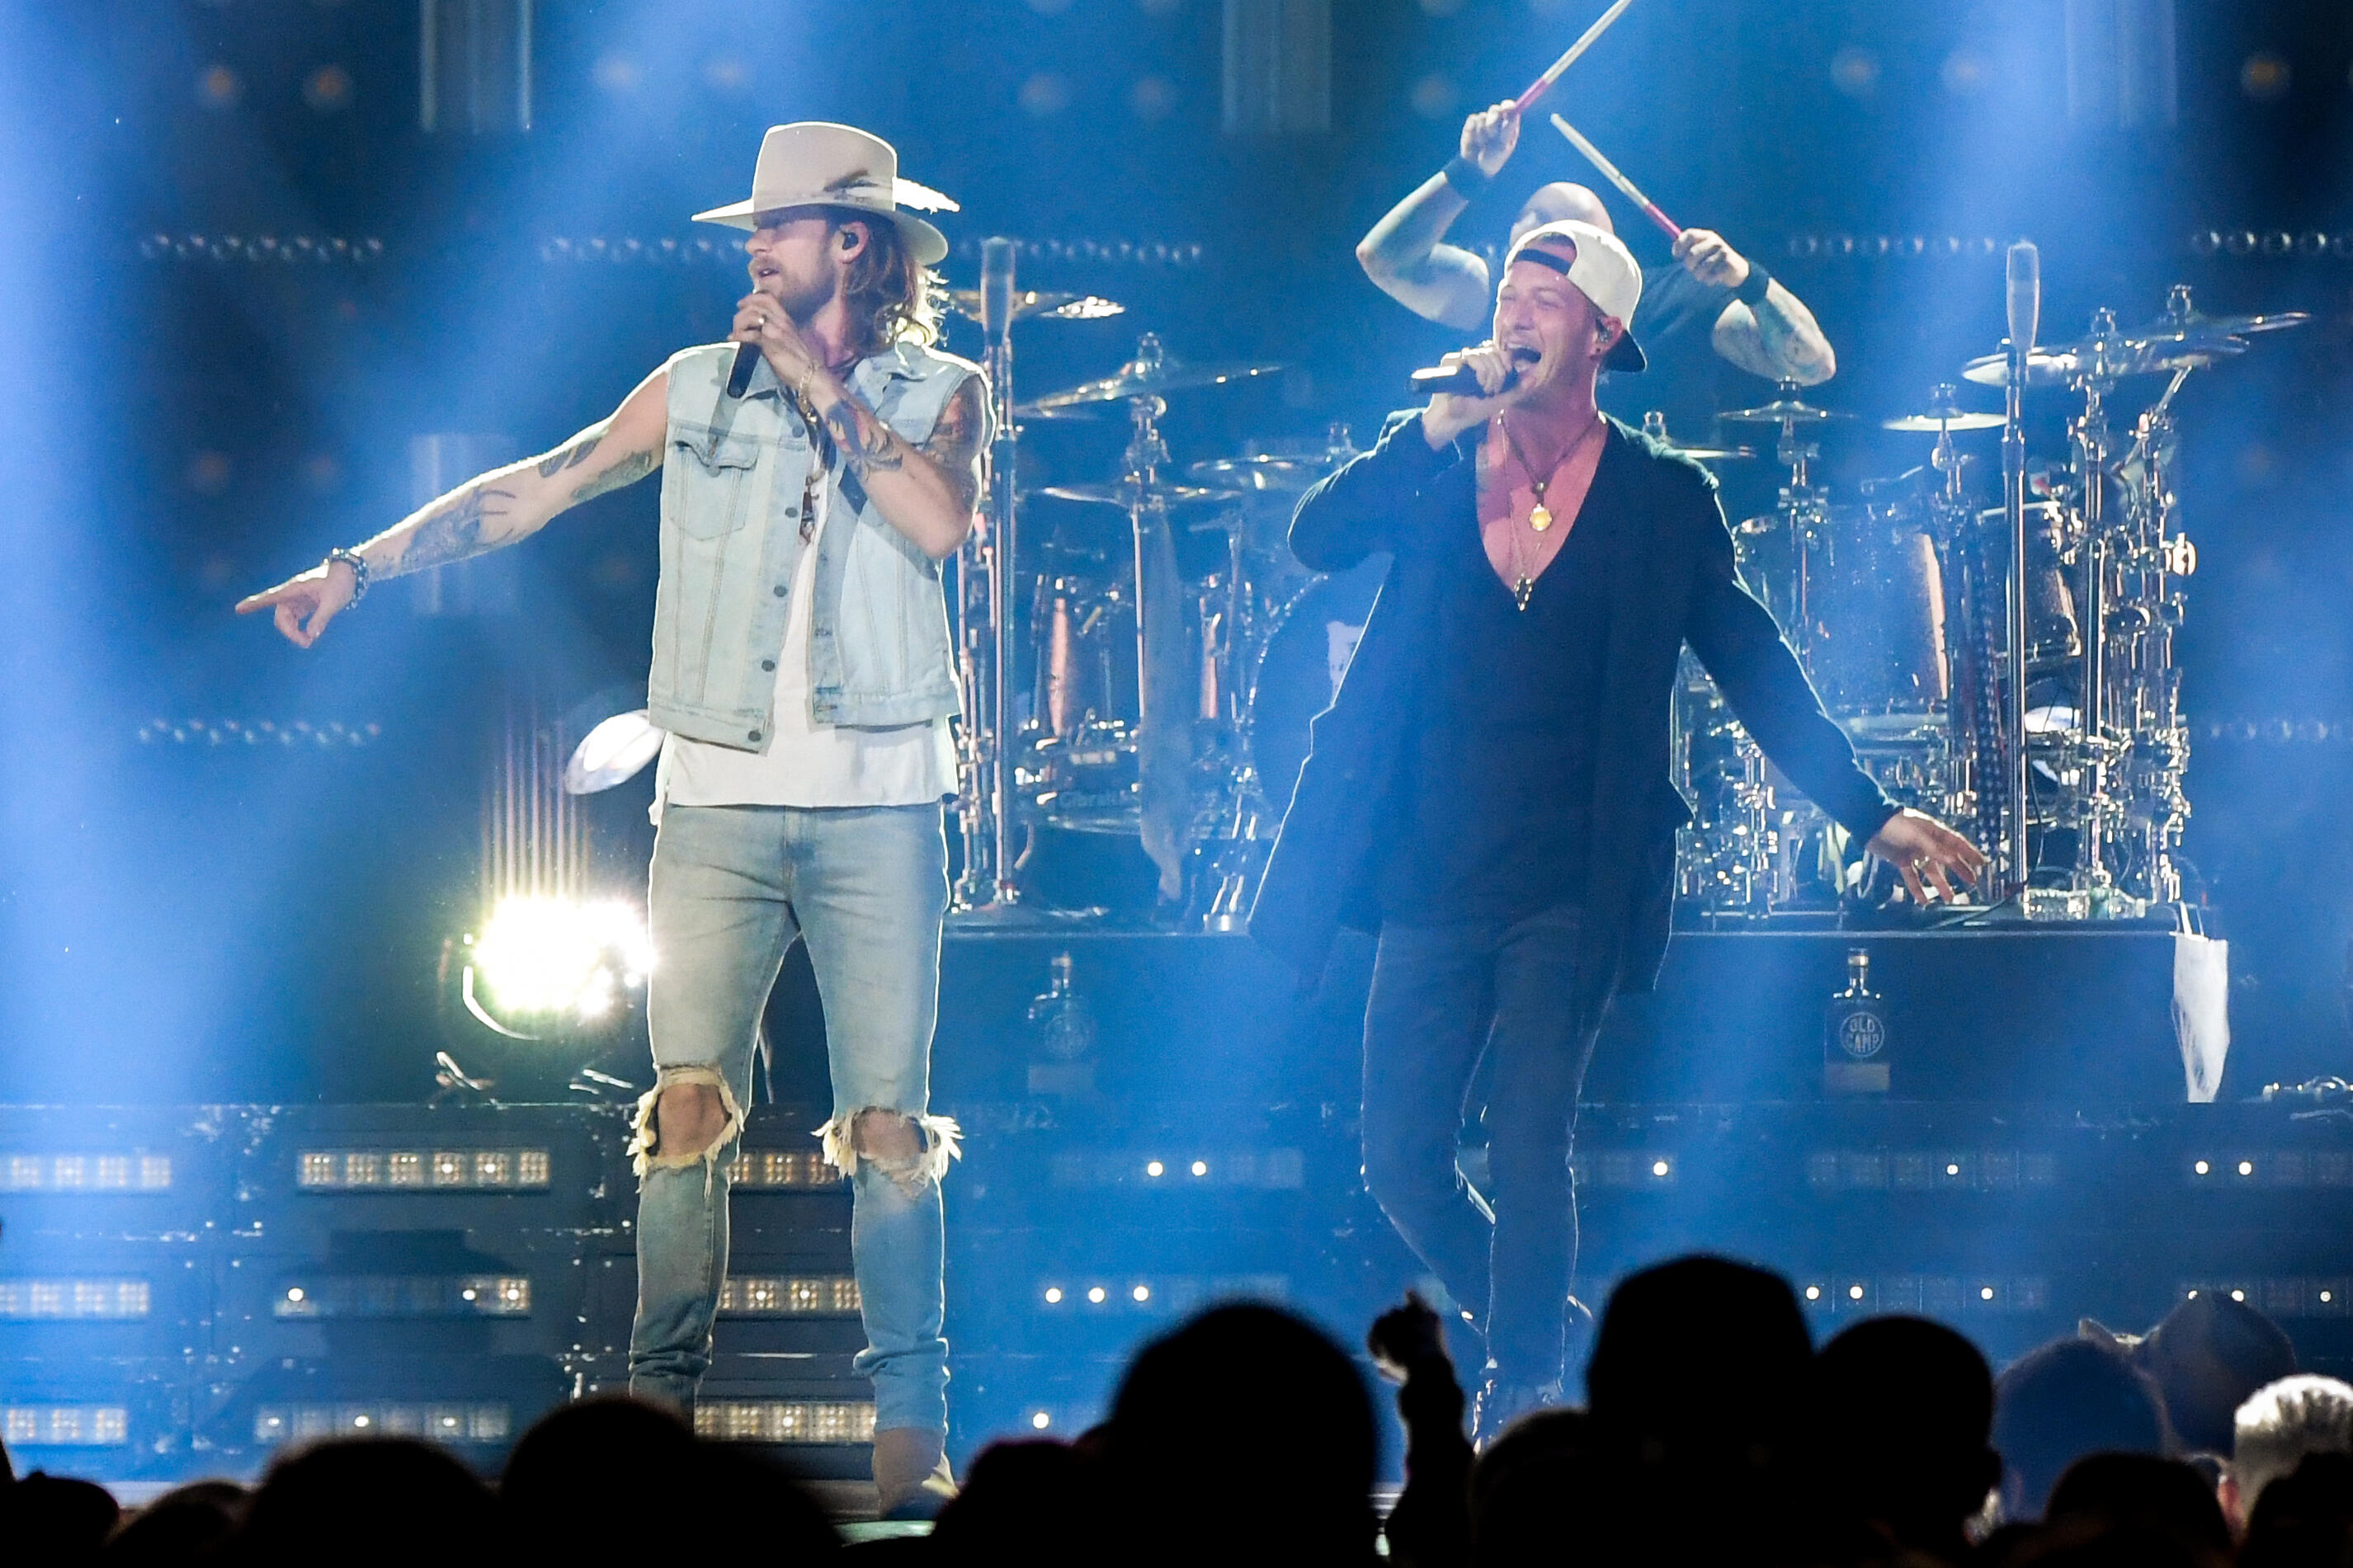 NEWARK, NJ - MARCH 18:  Brian Kelley (L) and Tyler Hubbard of Florida Georgia Line perform during their Dig Your Roots Tour at Newark, New Jersey at Prudential Center on March 18, 2017 in Newark, New Jersey.  (Photo by Mike Coppola/Getty Images)